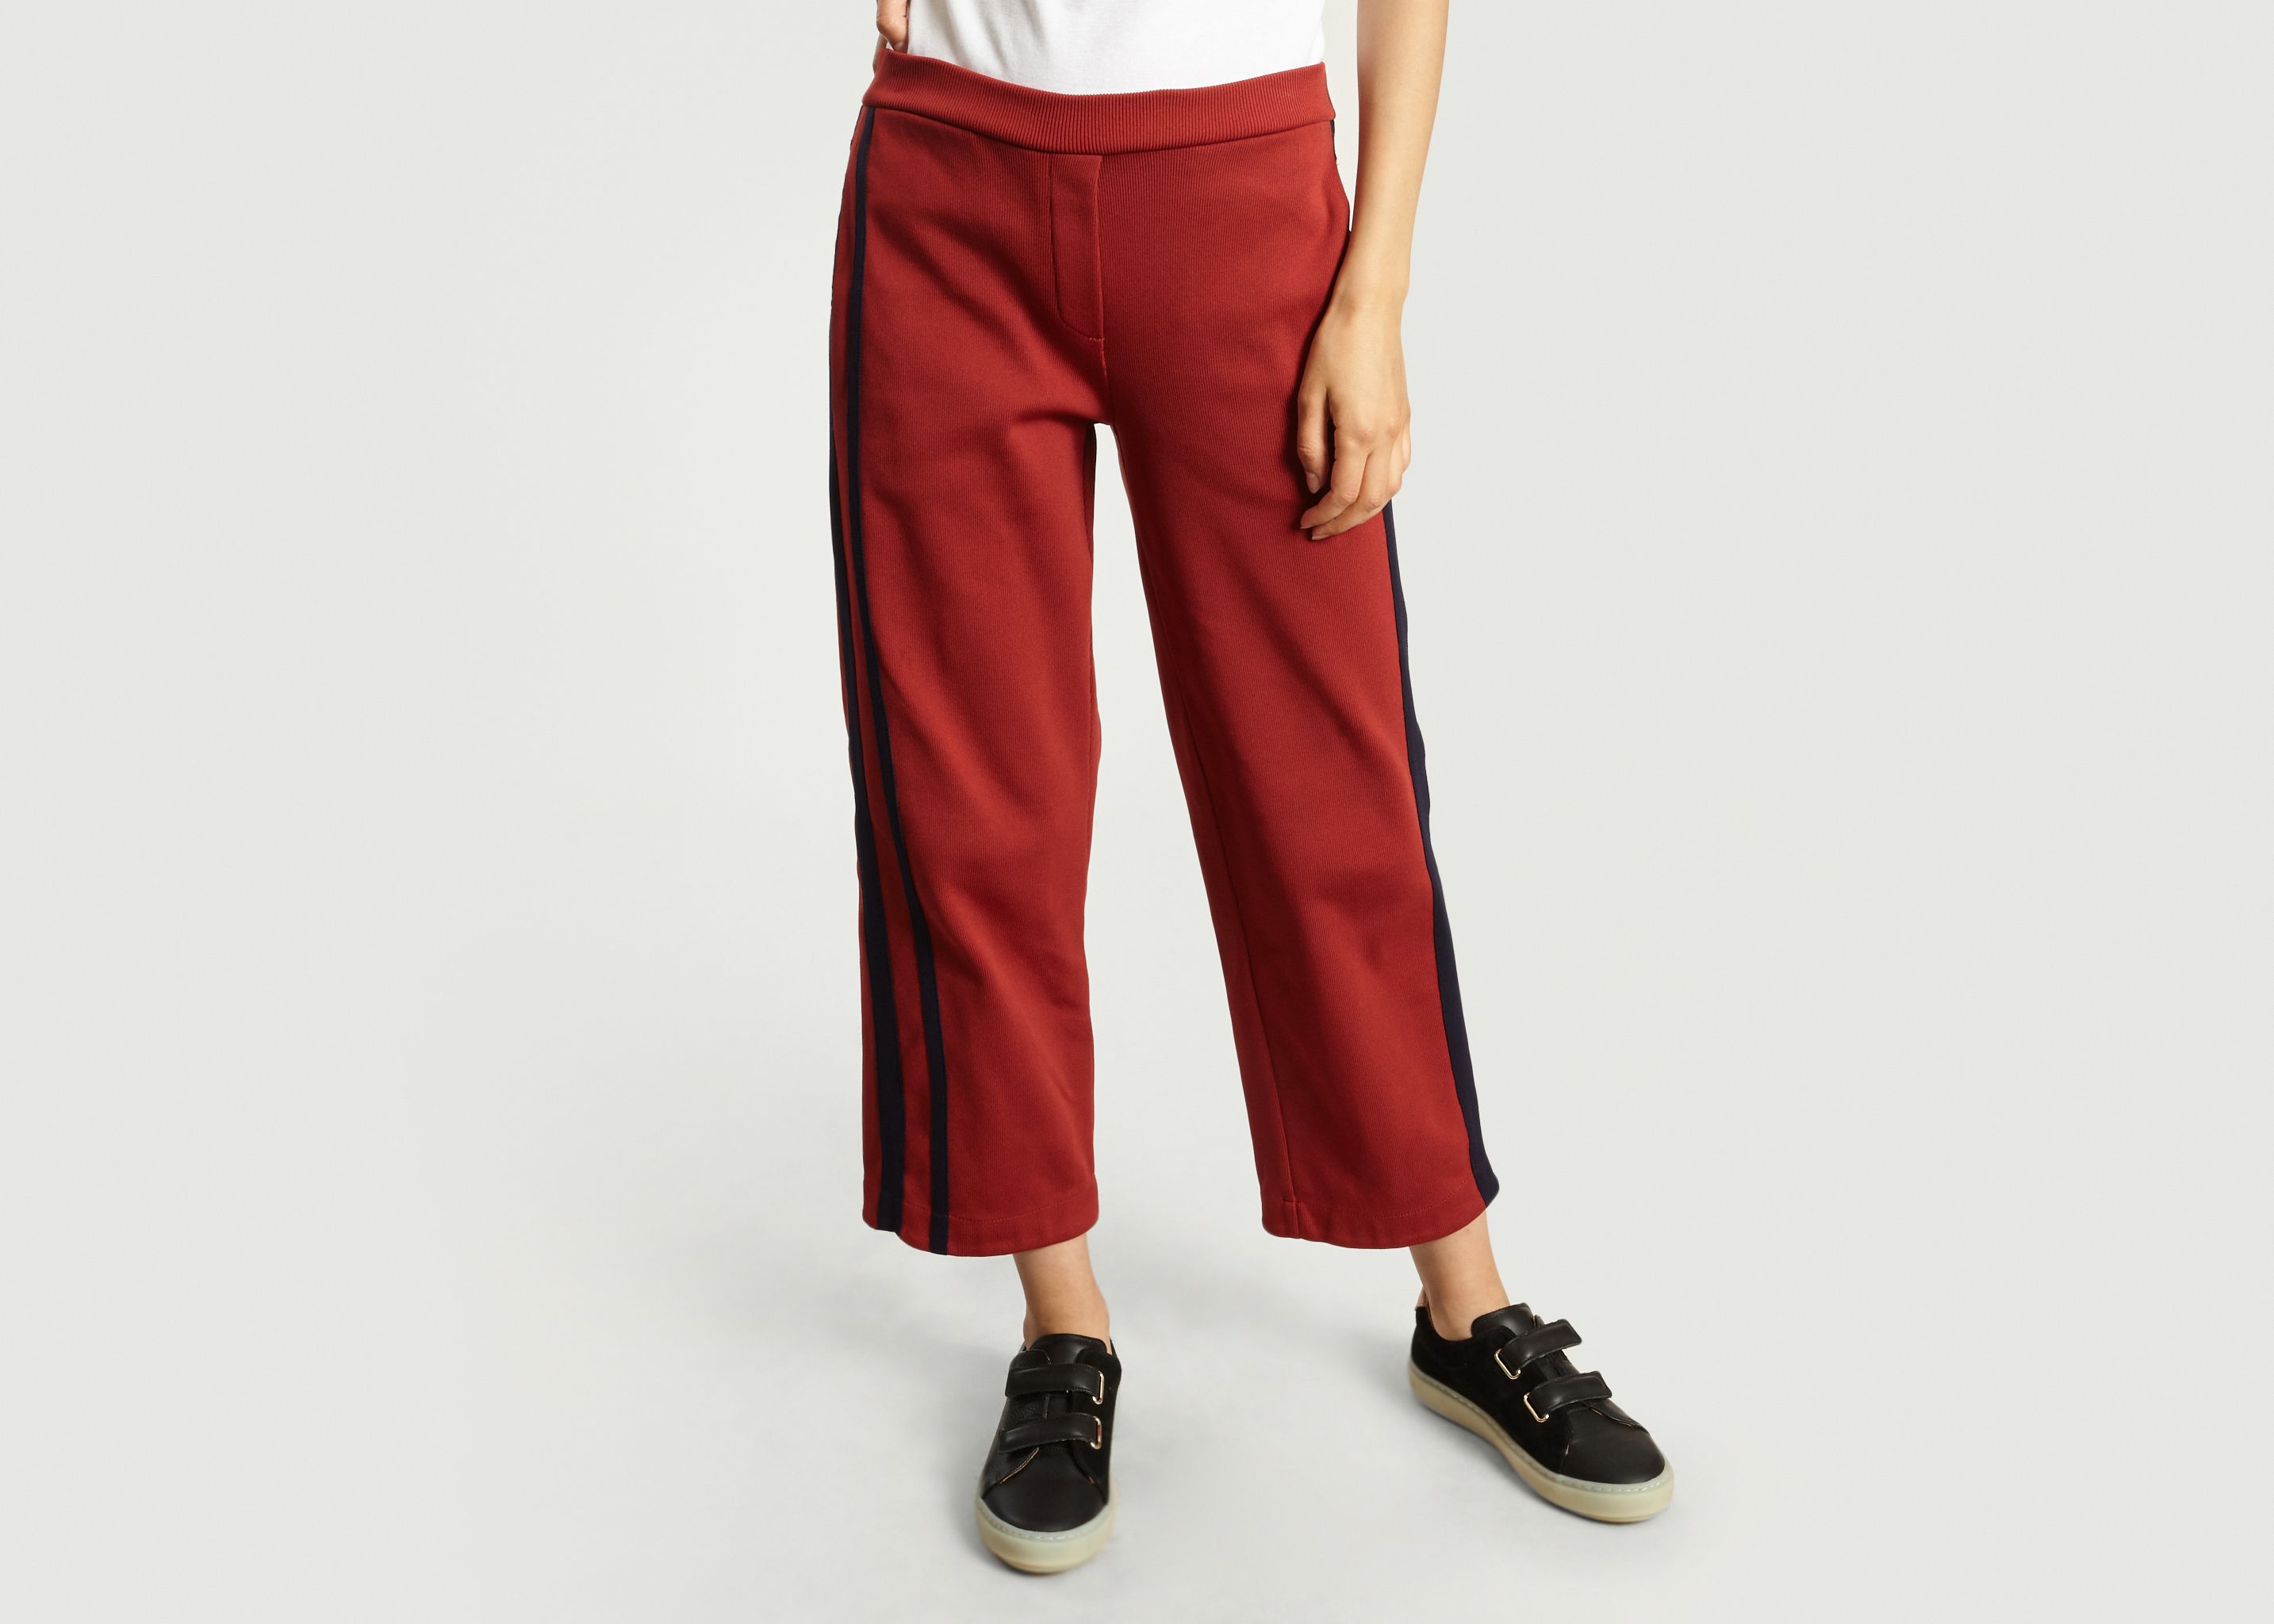 Kors Anderson Trousers - Roseanna